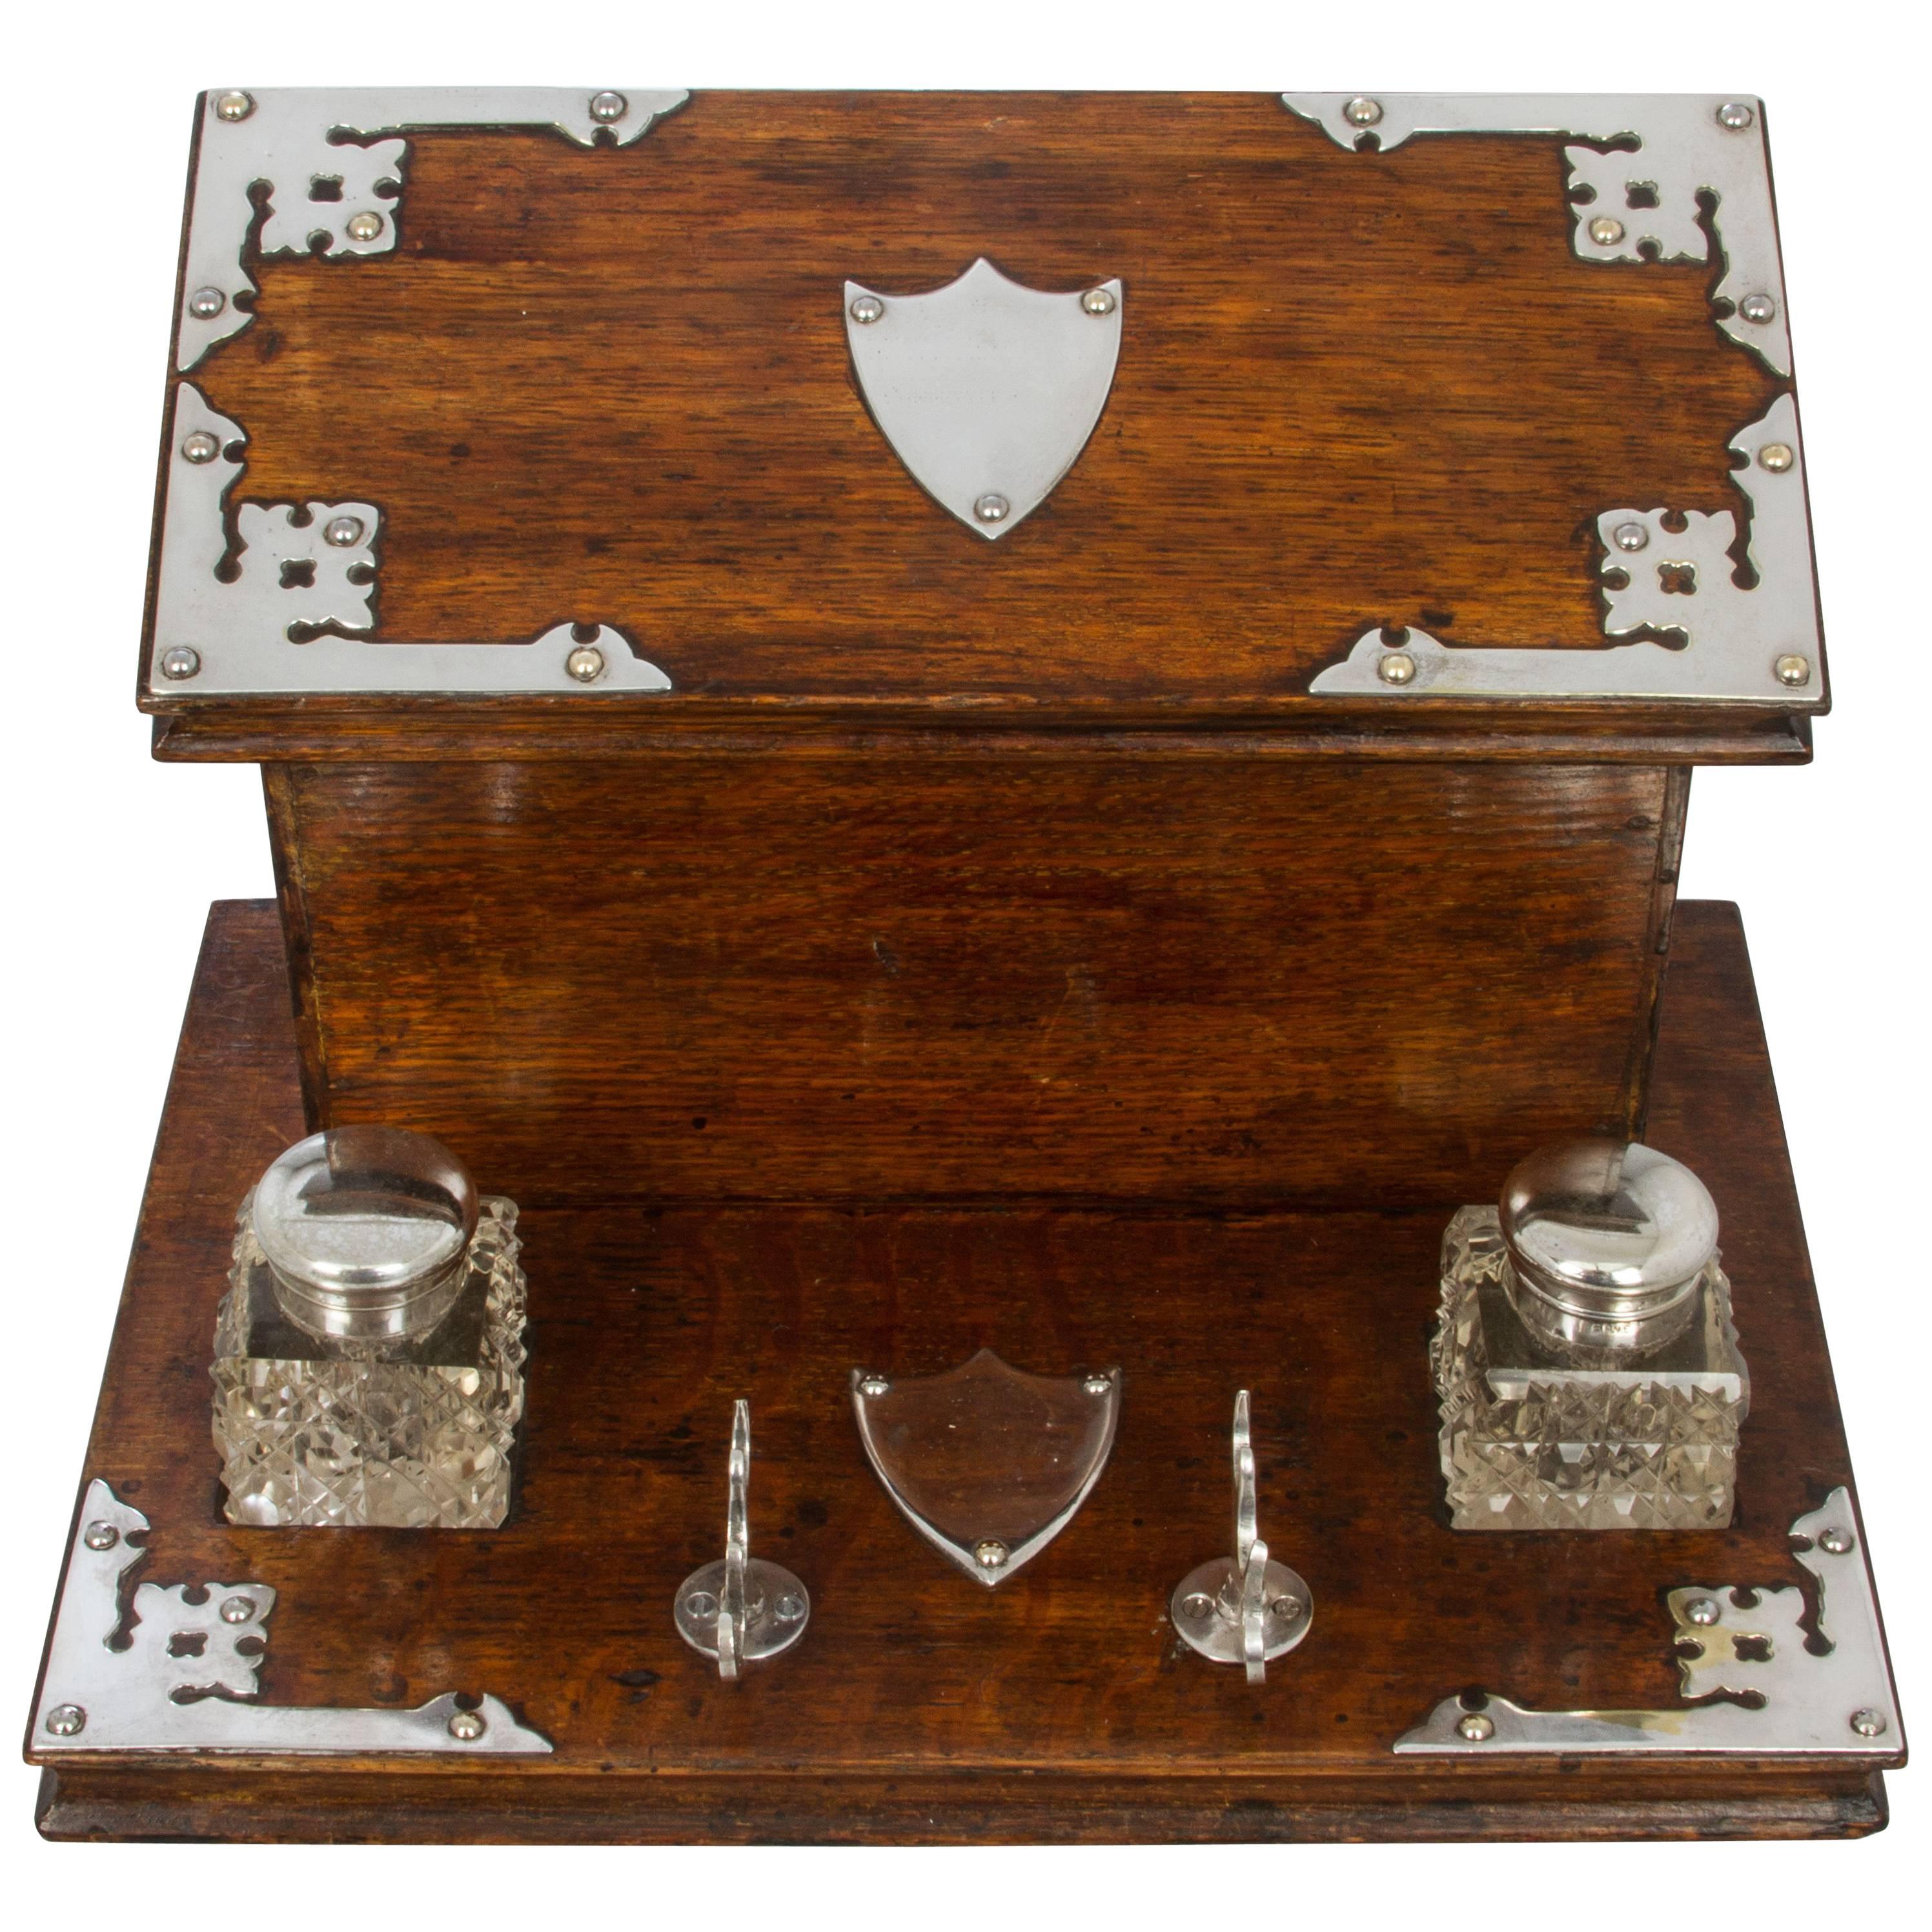 Victorian Wood and Silver Plate Writing Box with a Pair of Inkwells